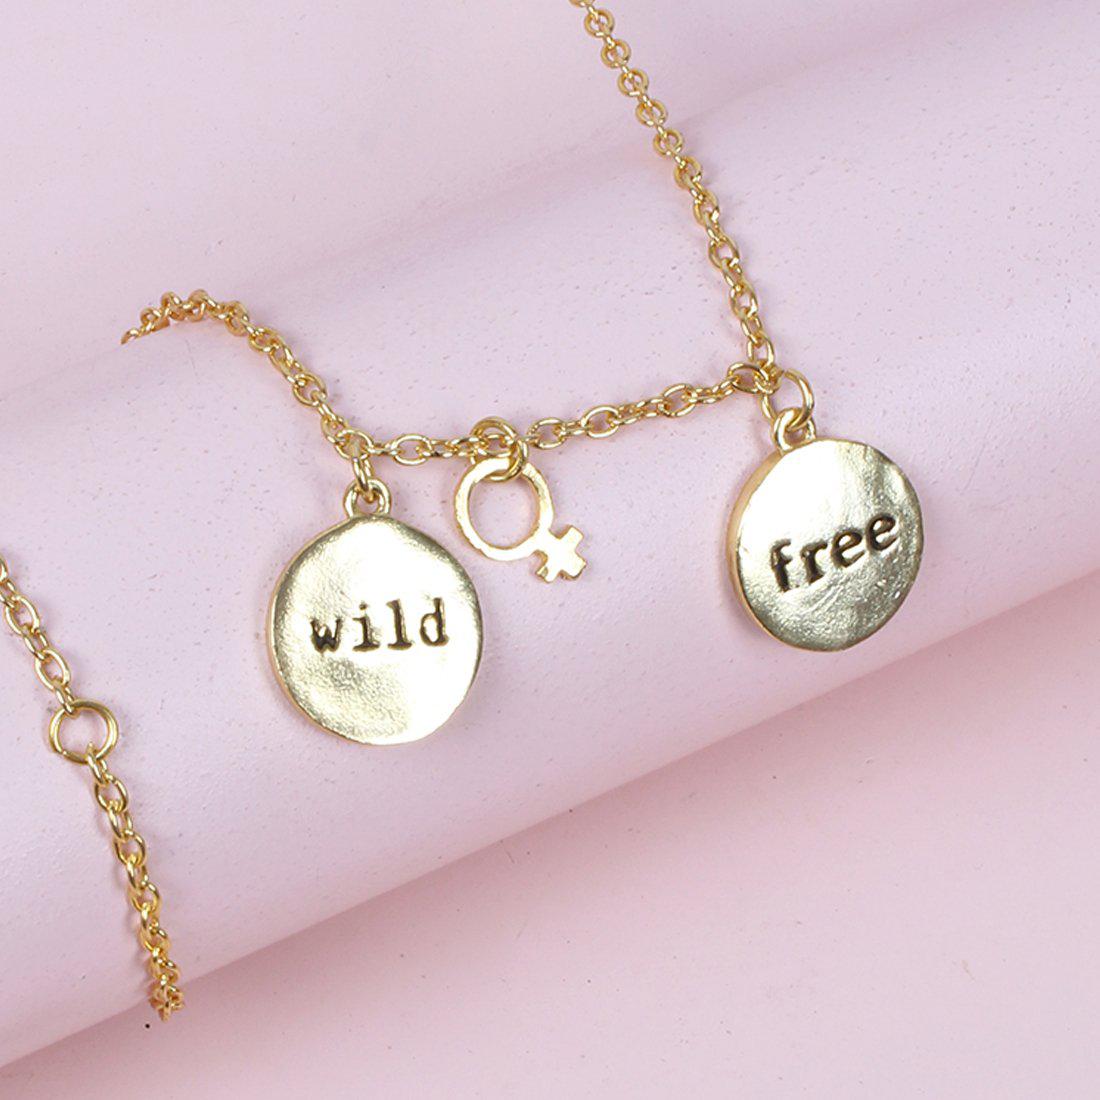 WILD AND FREE CHAIN NECKLACE WITH GIRL CHARM